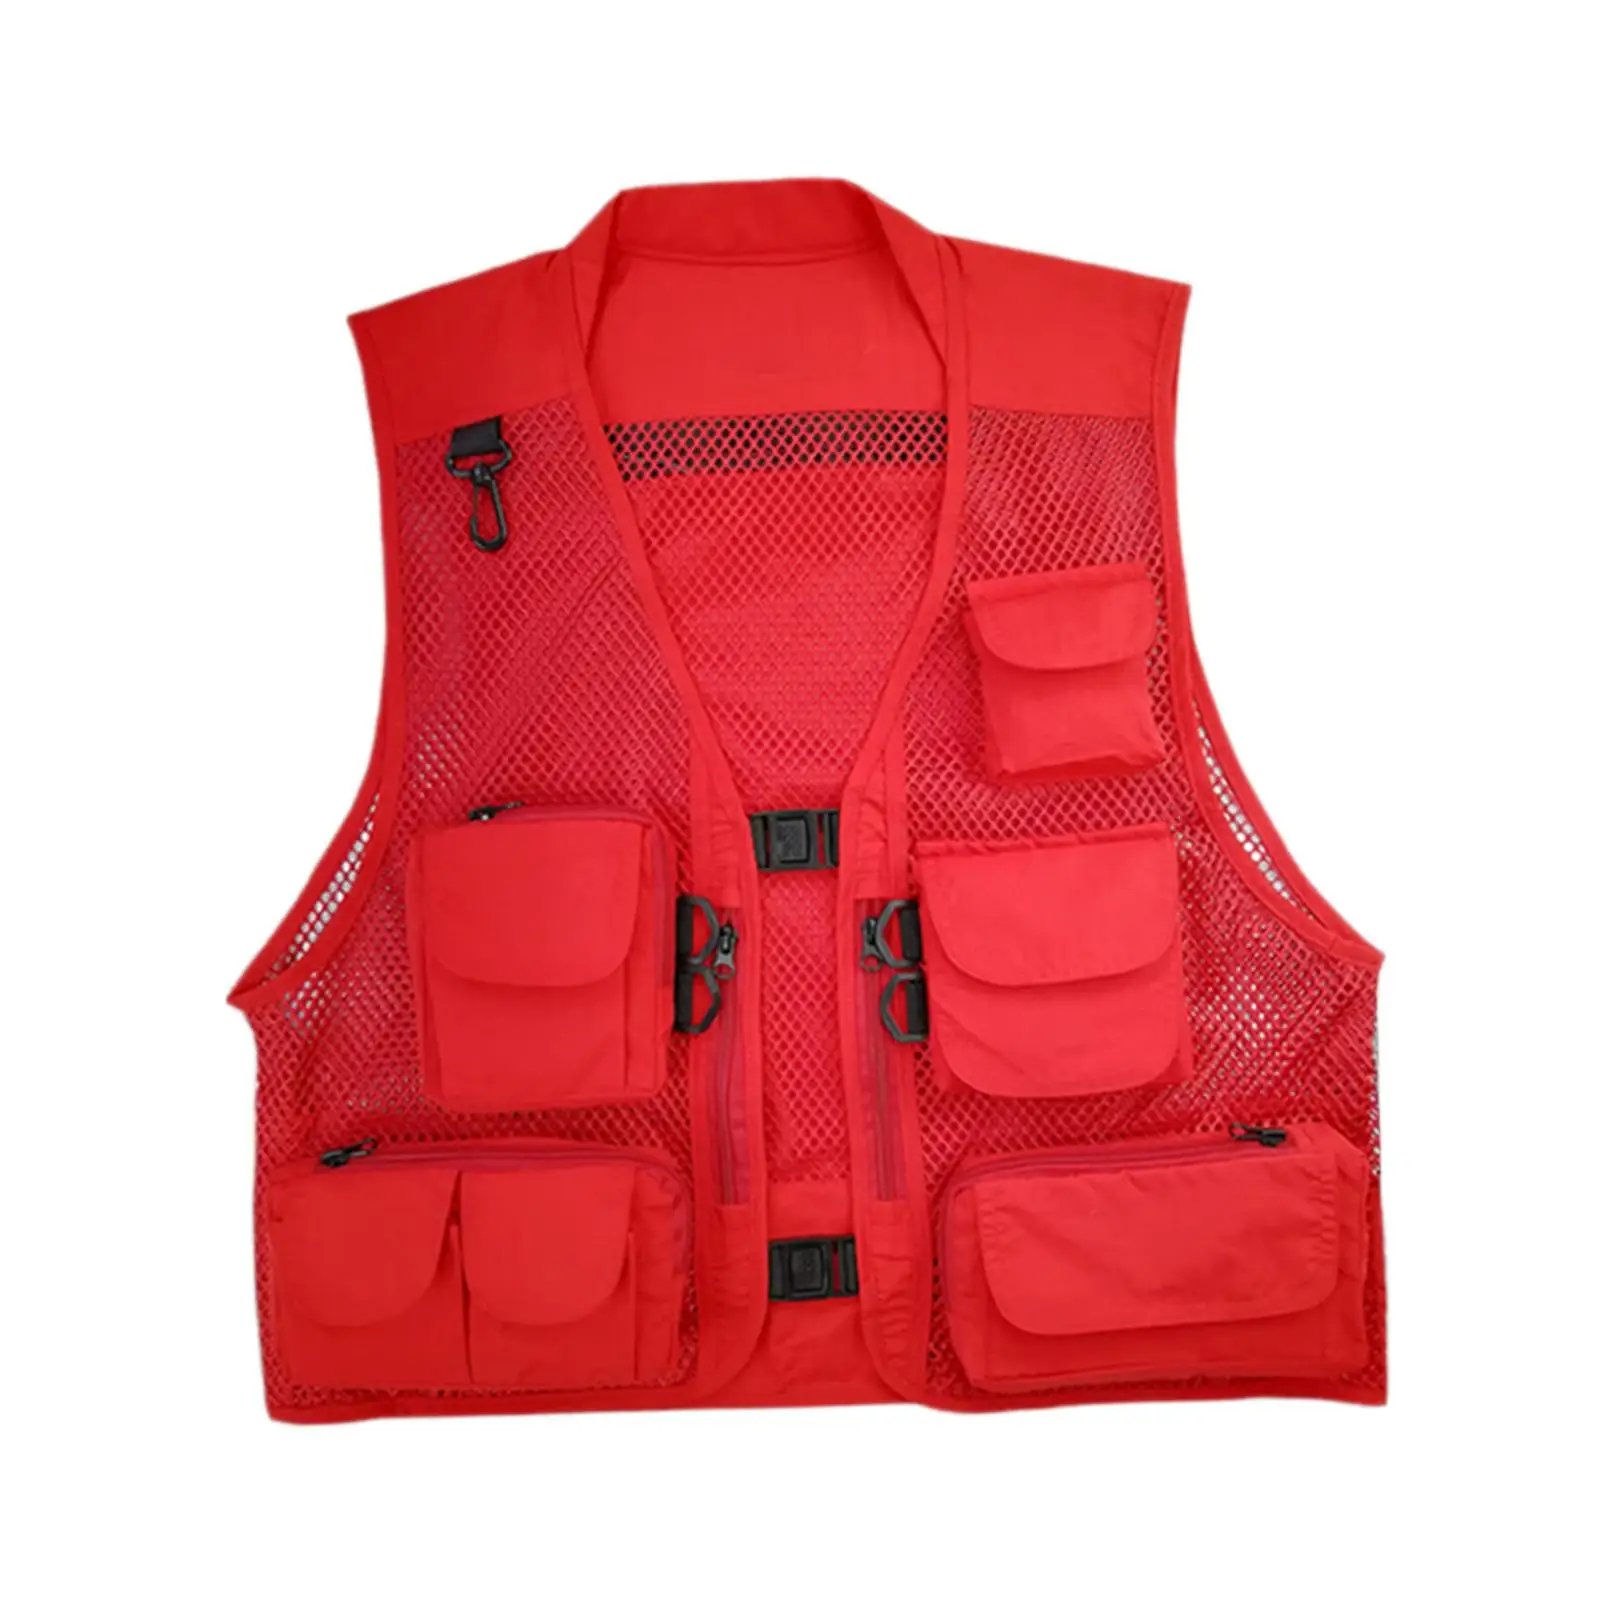 Mesh Fishing Photography Vest Multi Zipper Pockets for Sightseeing,Traveling